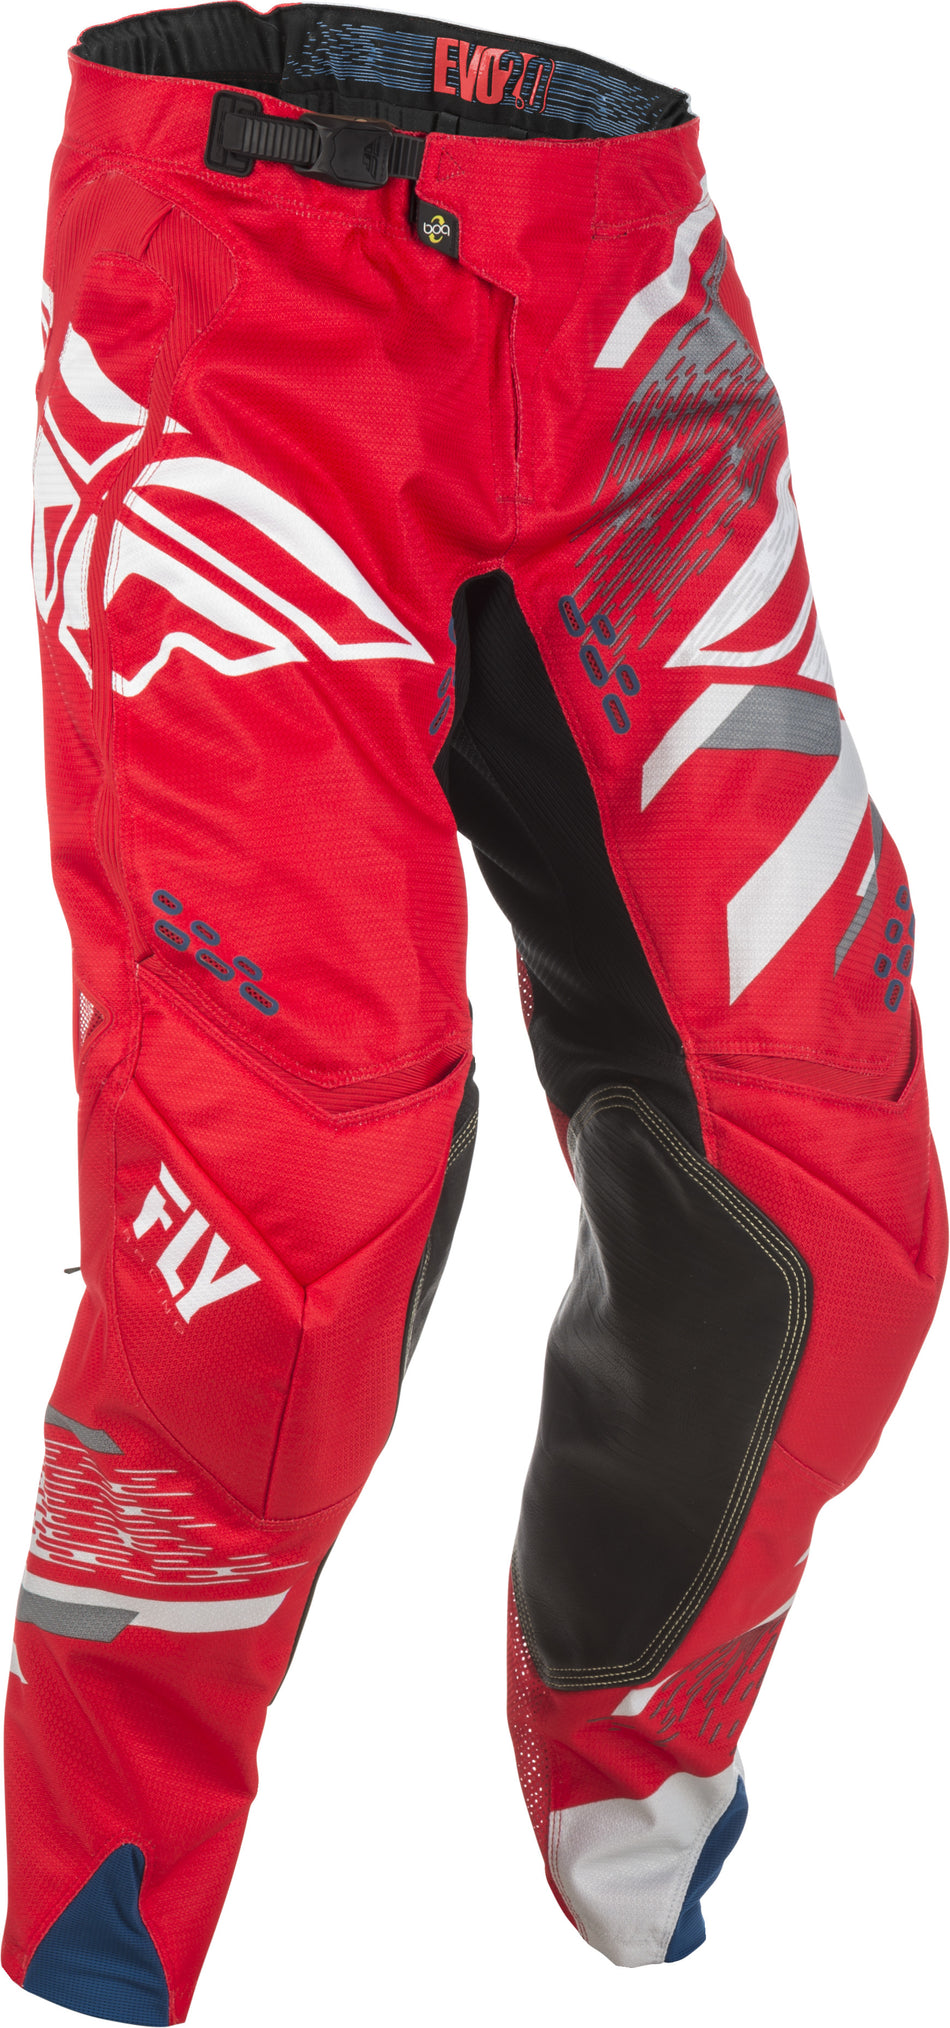 FLY RACING Evolution 2.0 Pants Red/Grey/White Sz 34 371-23234